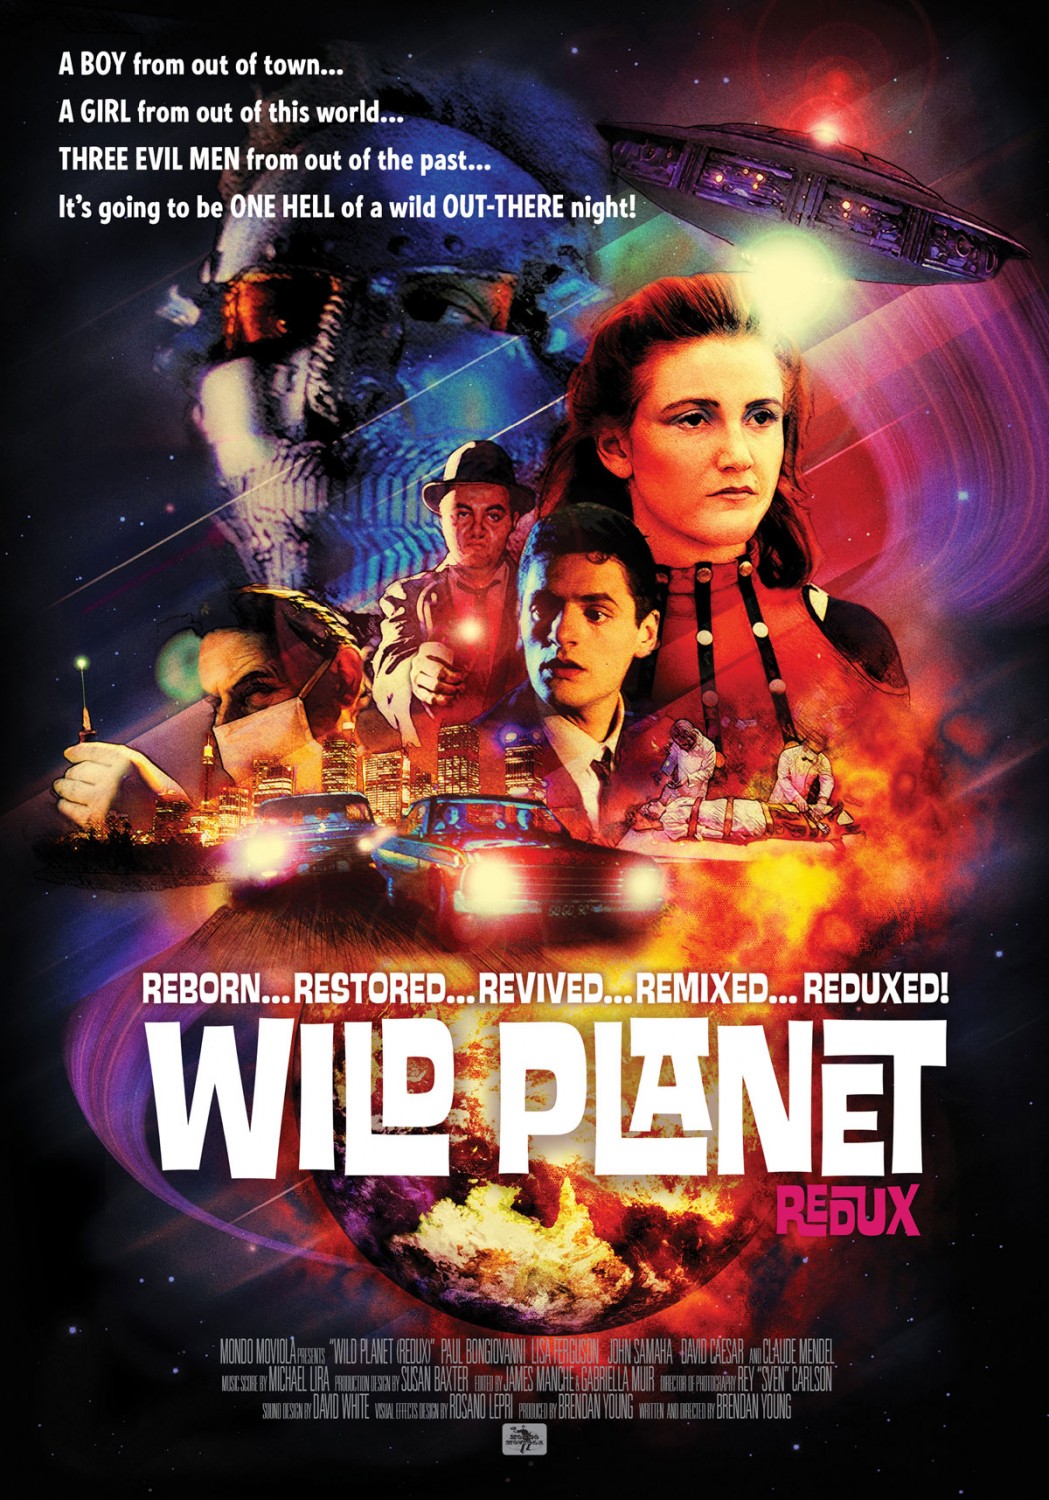 Extra Large Movie Poster Image for Wild Planet (Redux)